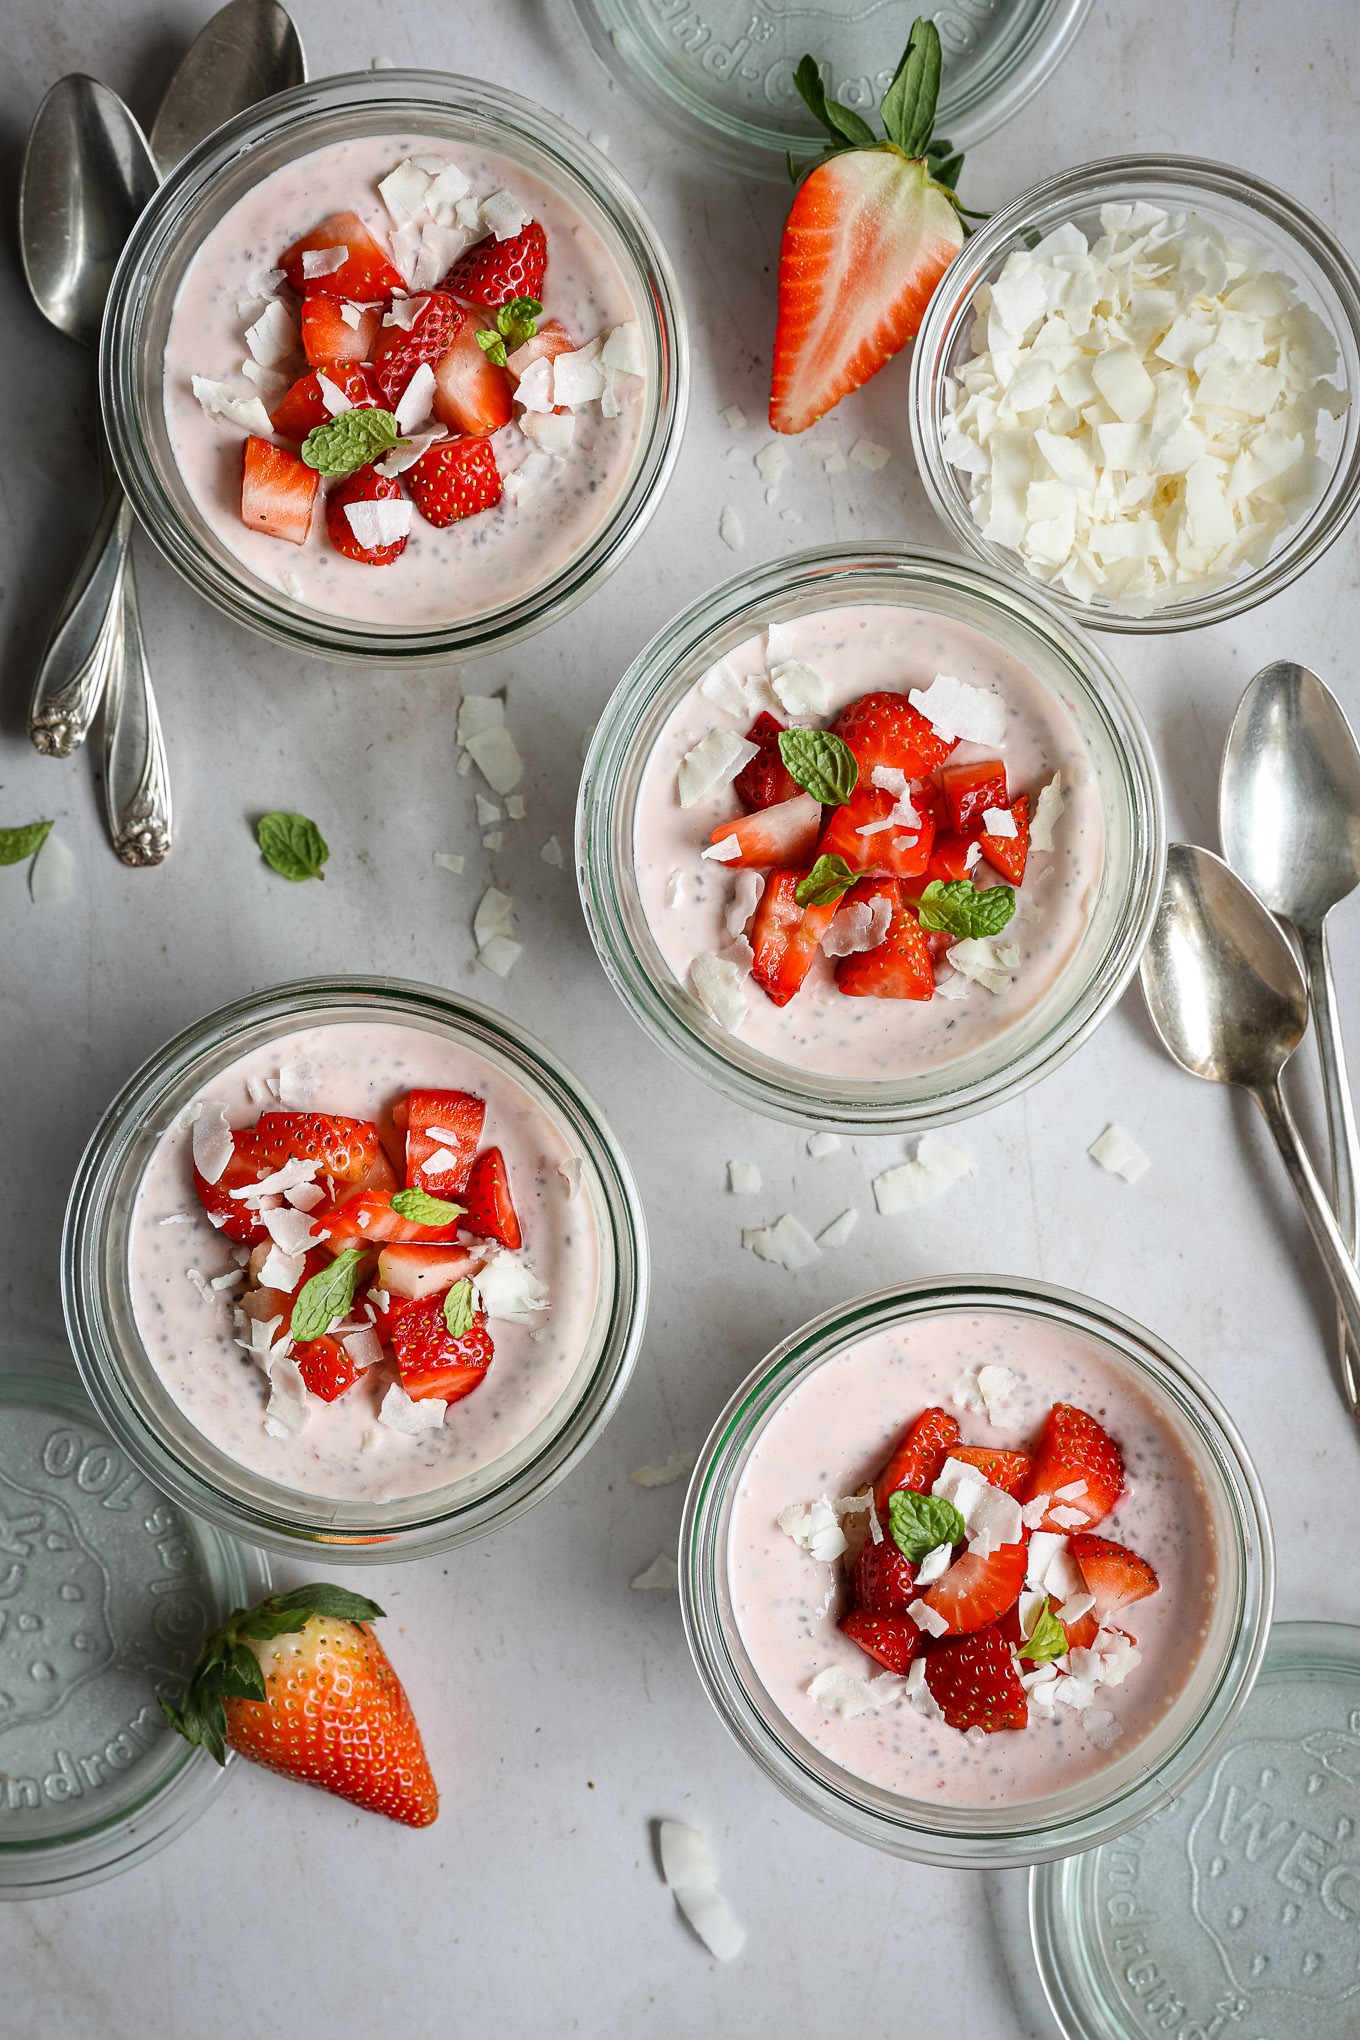 stawberry chia seed pudding in glass jars topped with fresh strawberries.